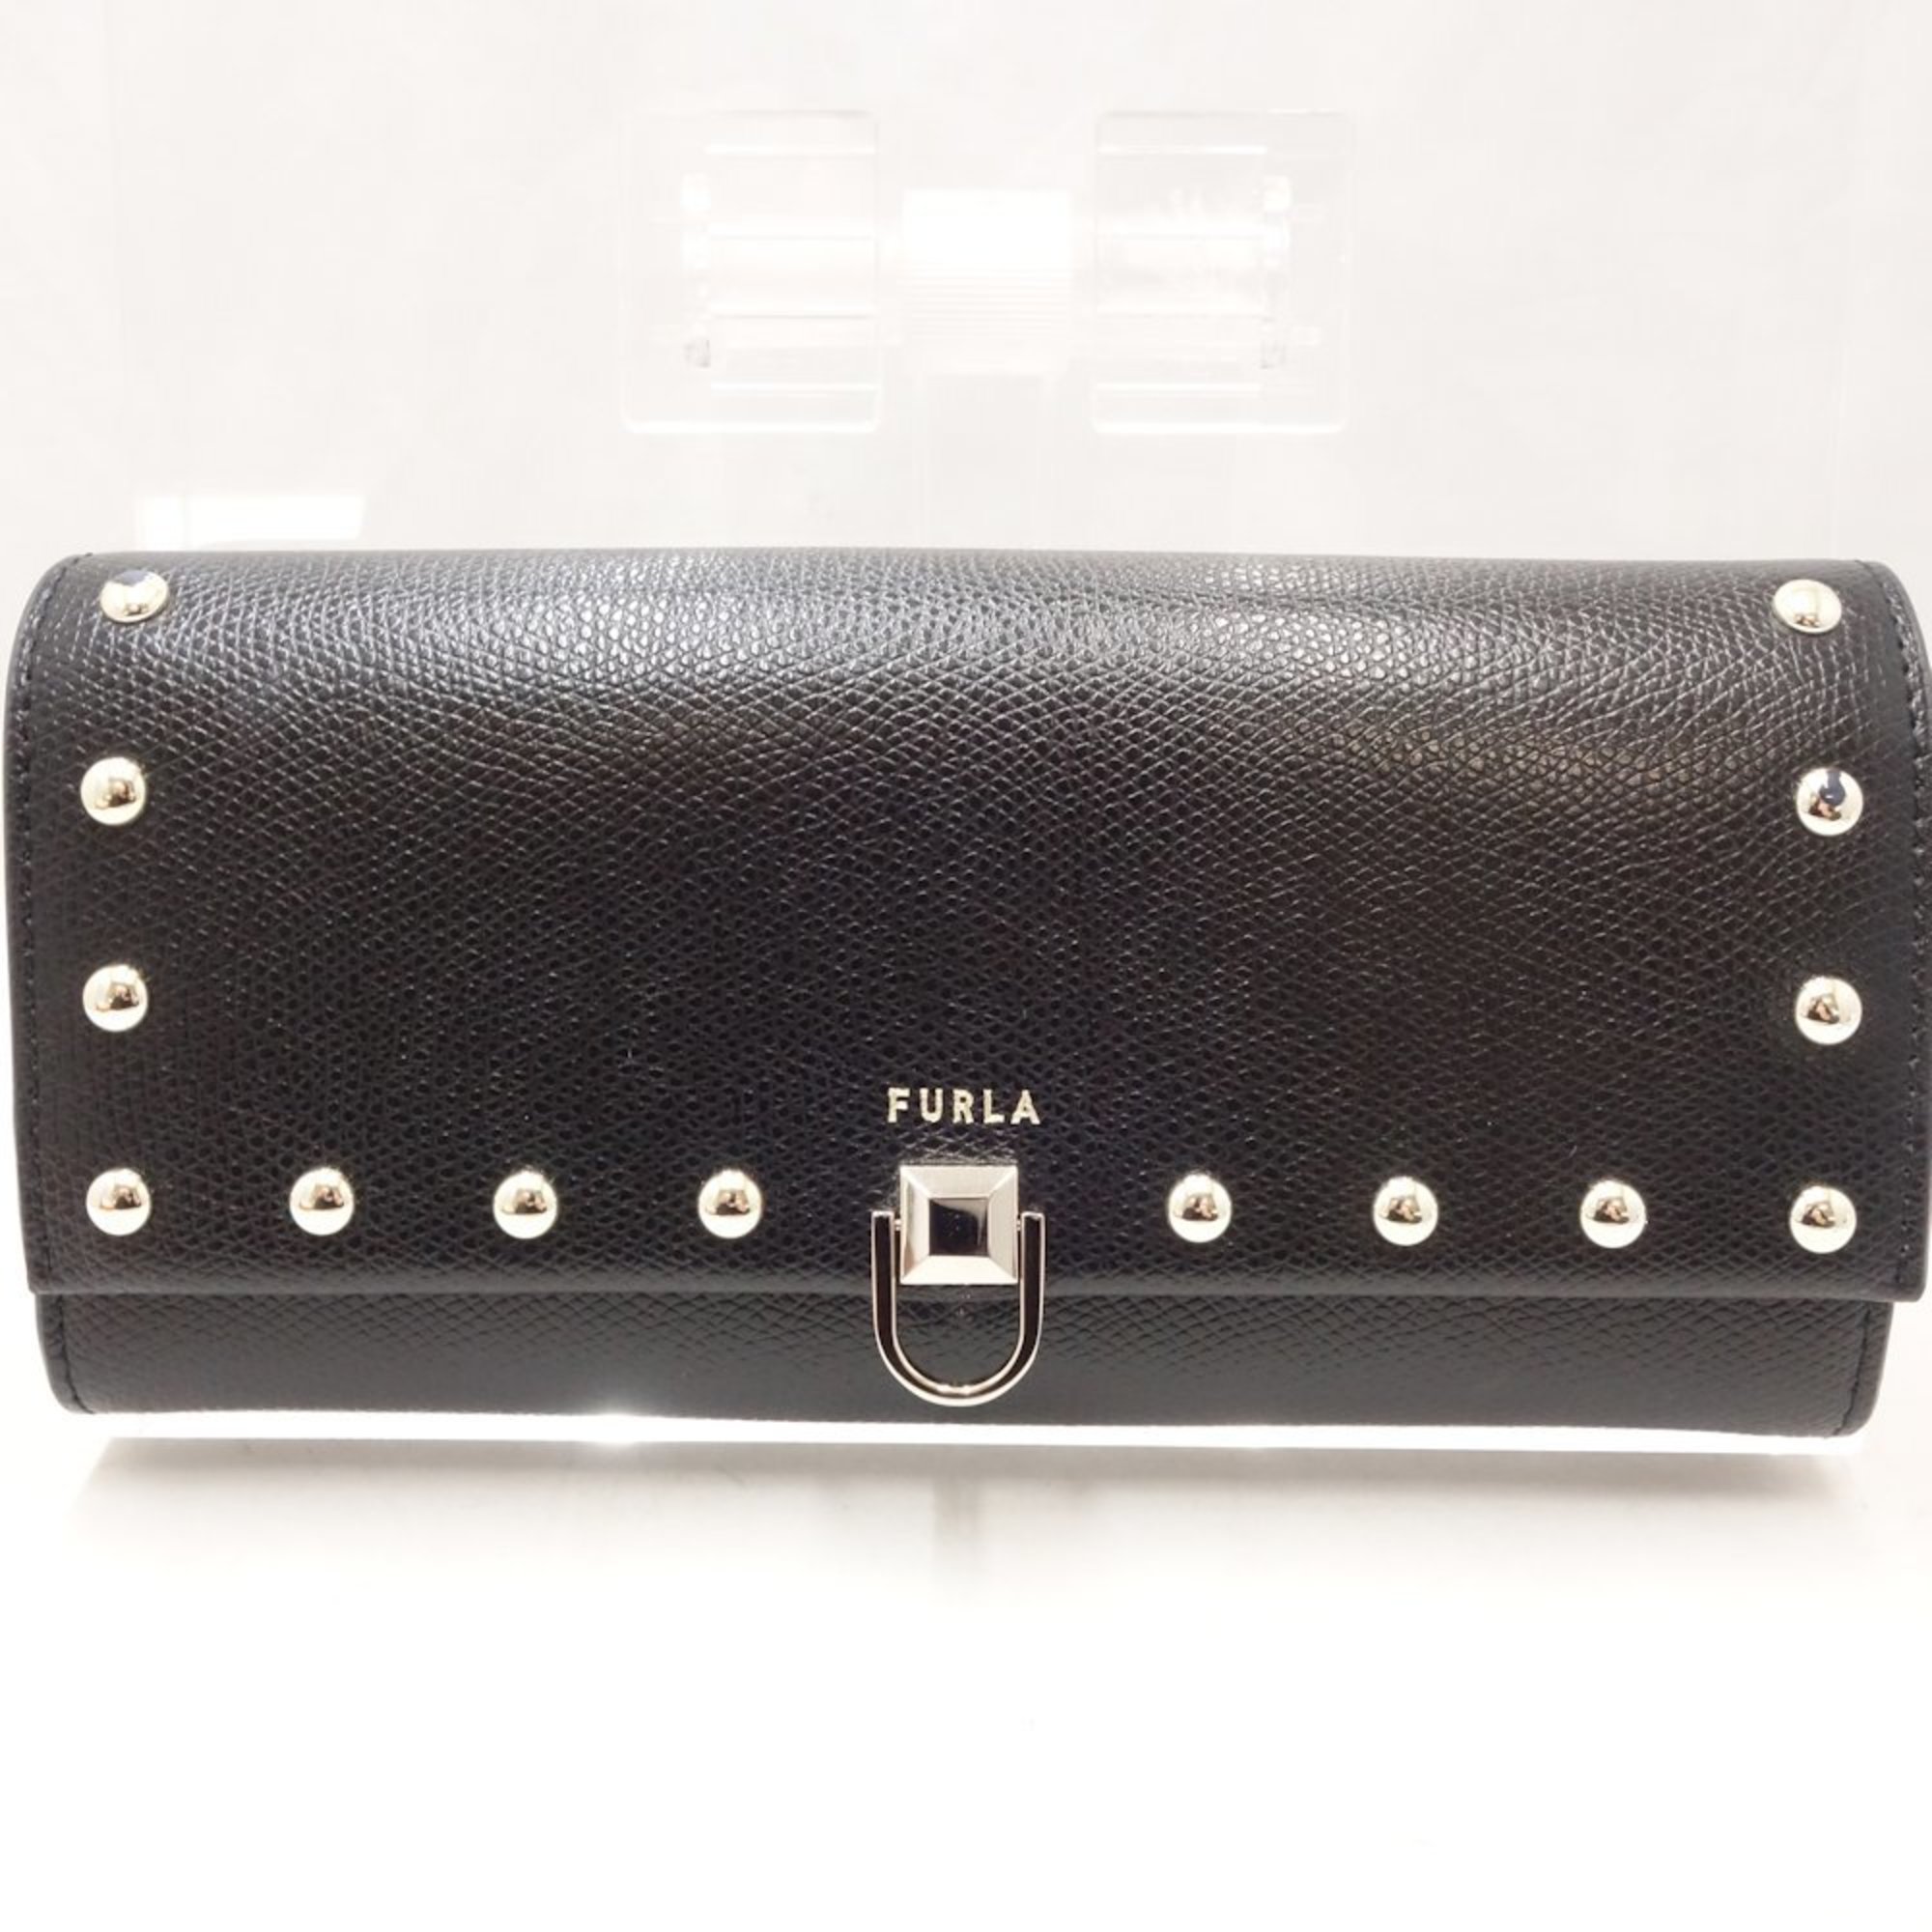 Furla MP00026 ARE000 long wallet leather black 083151